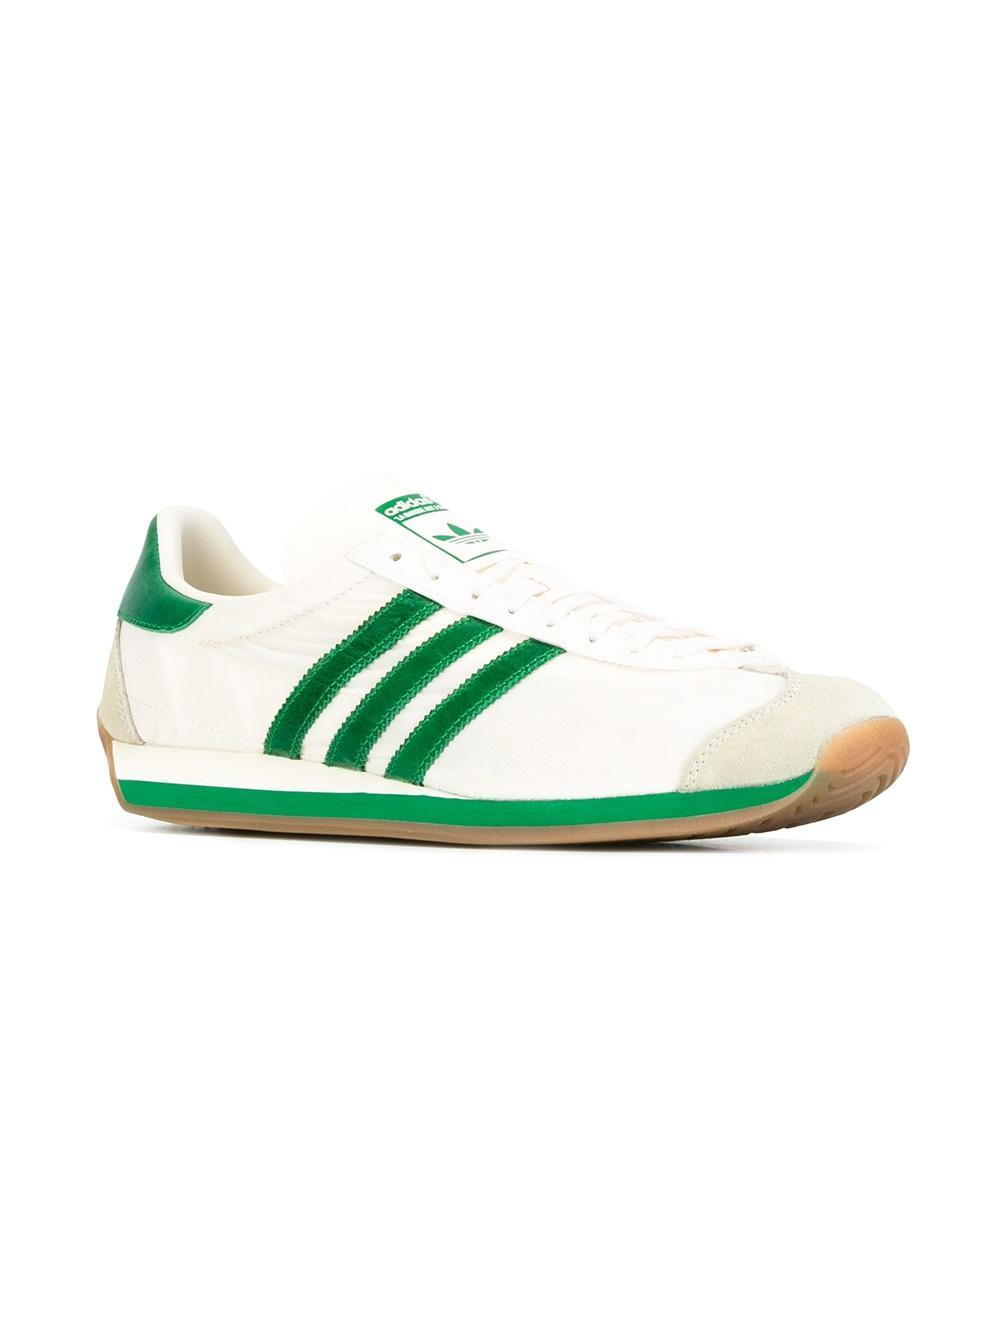 adidas Originals Leather 'country Og' Sneakers in White for Men - Lyst